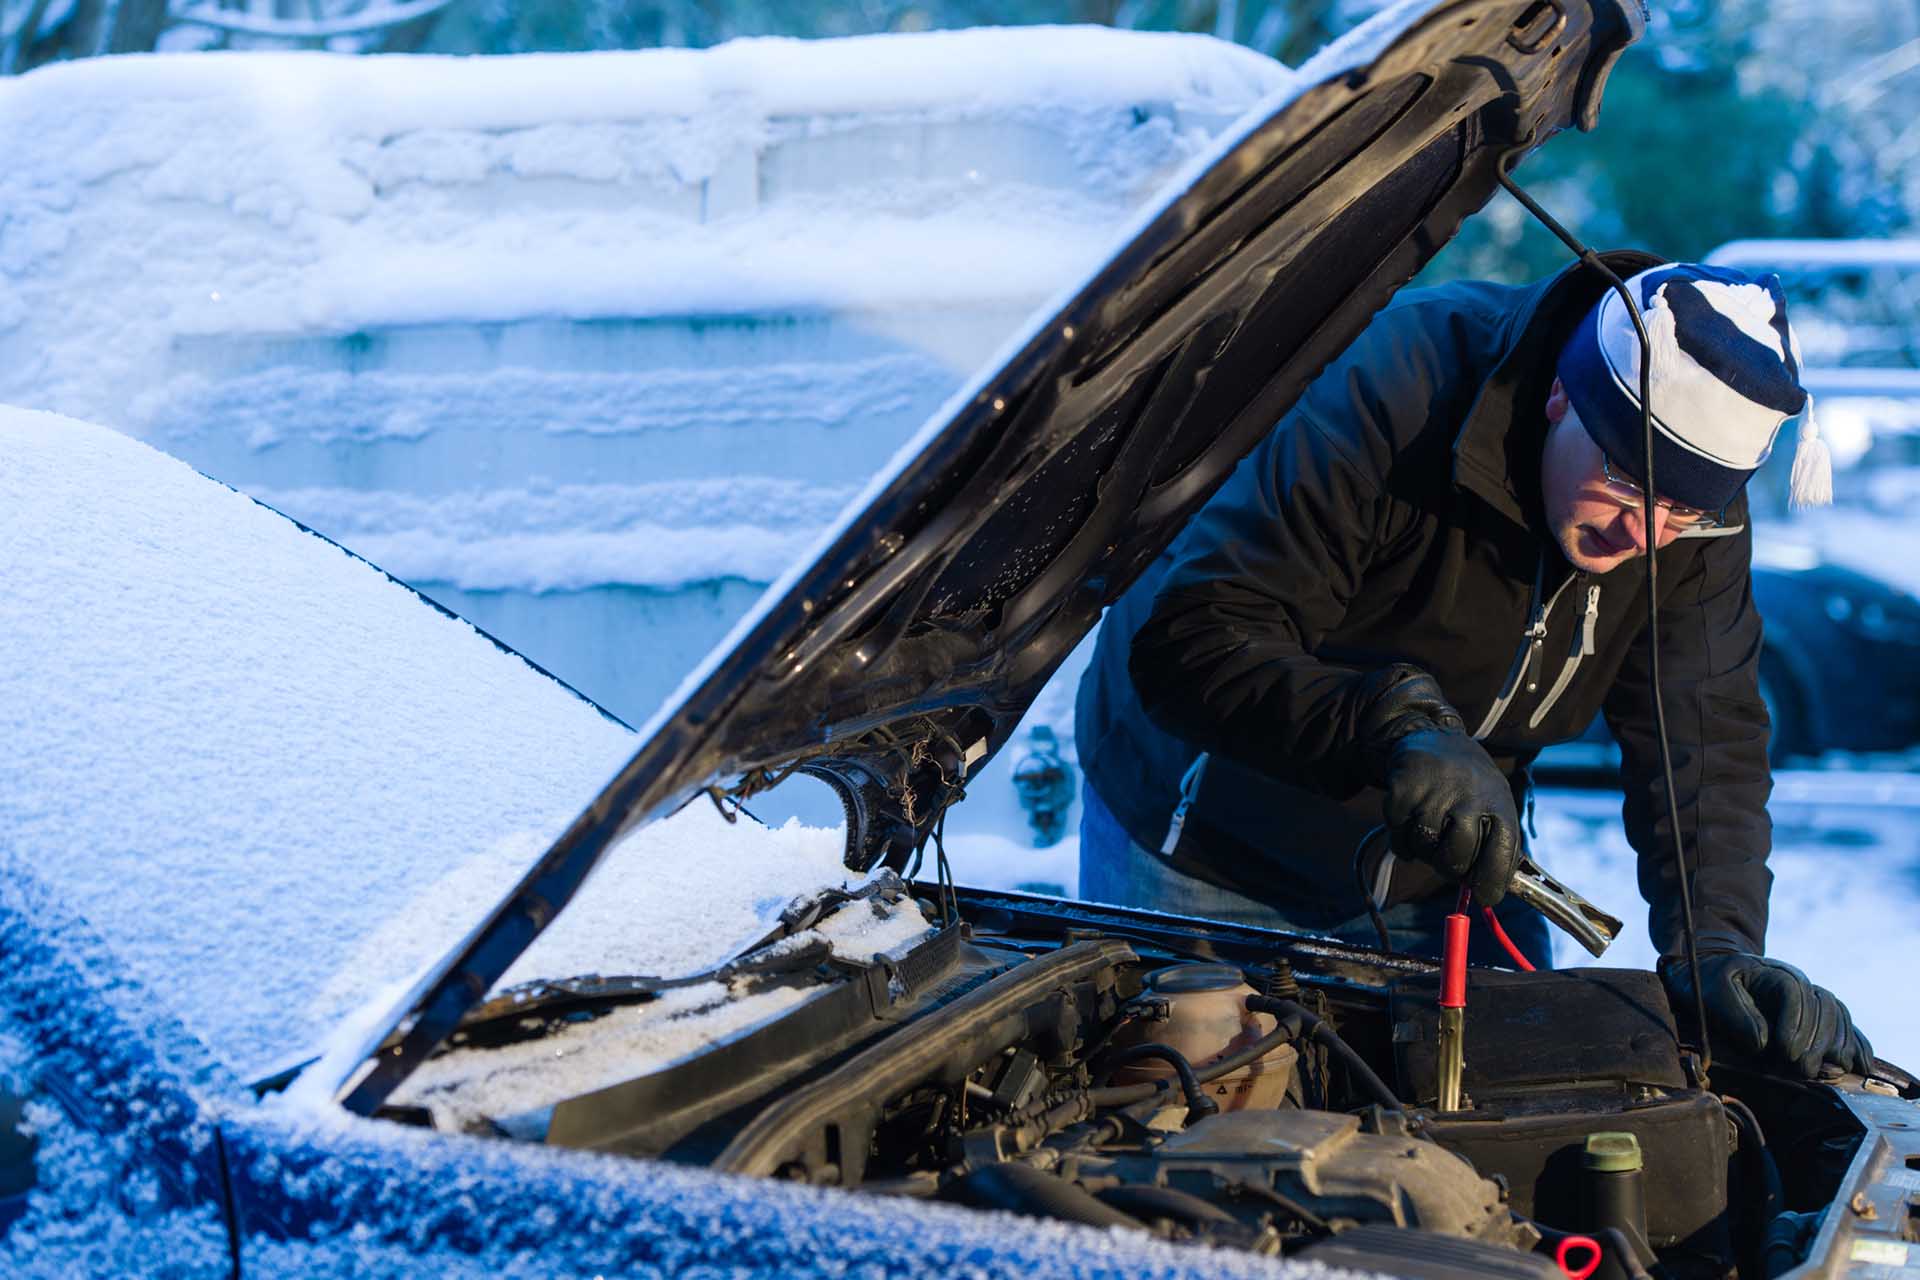 Man wearing a hat and gloves attaching jump leads to a car battery in the snow.